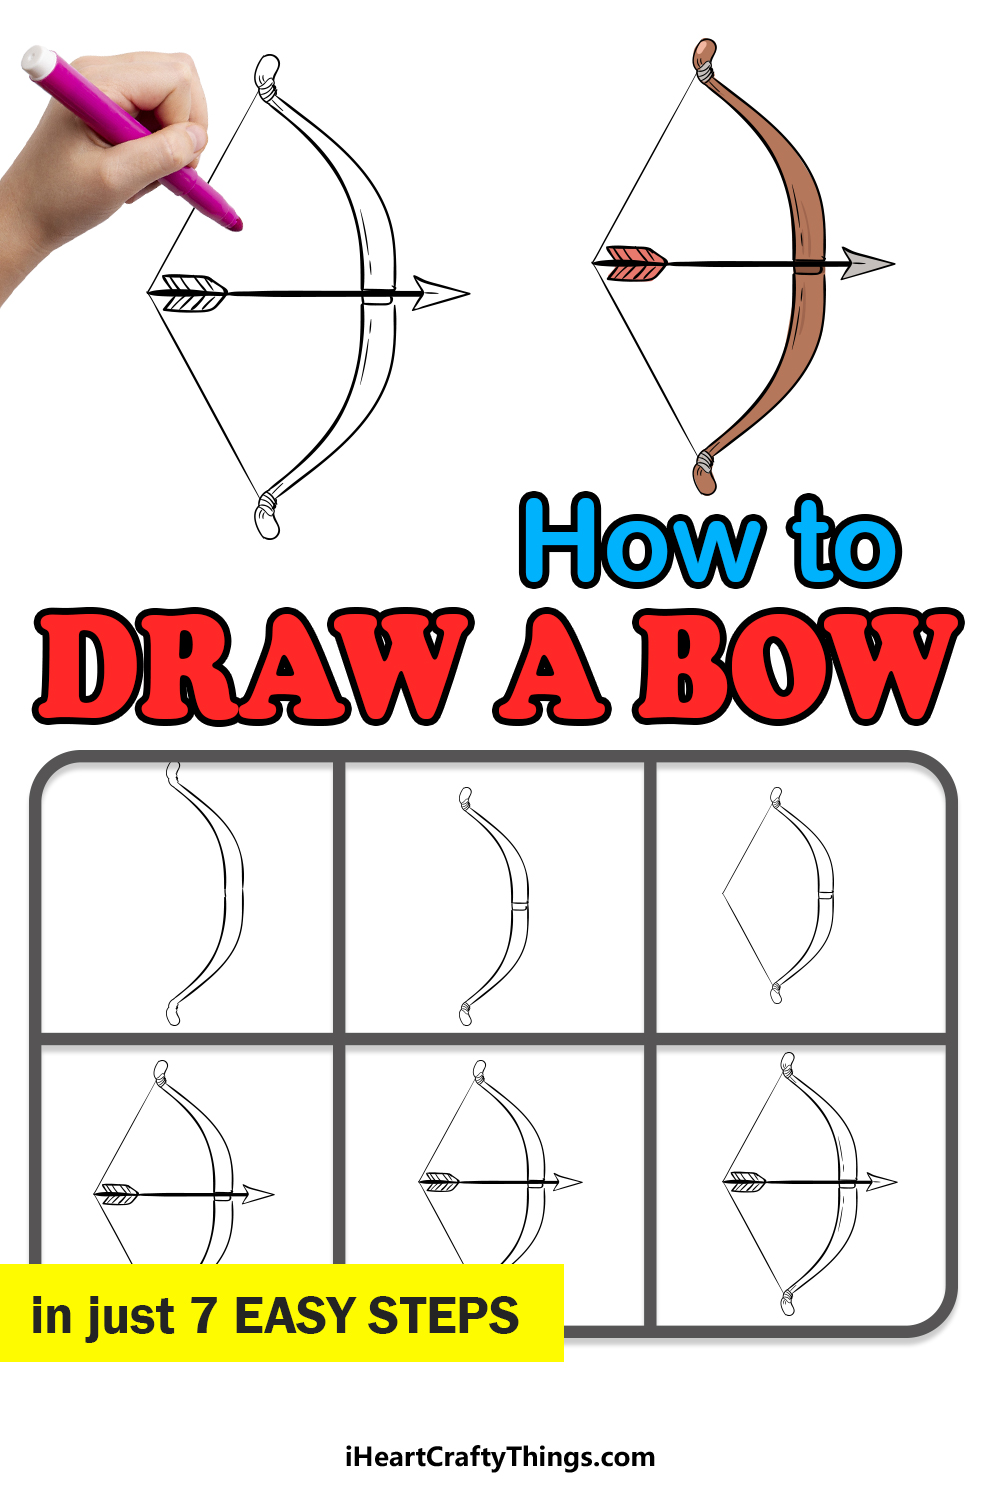 how to draw a bow in 7 easy steps